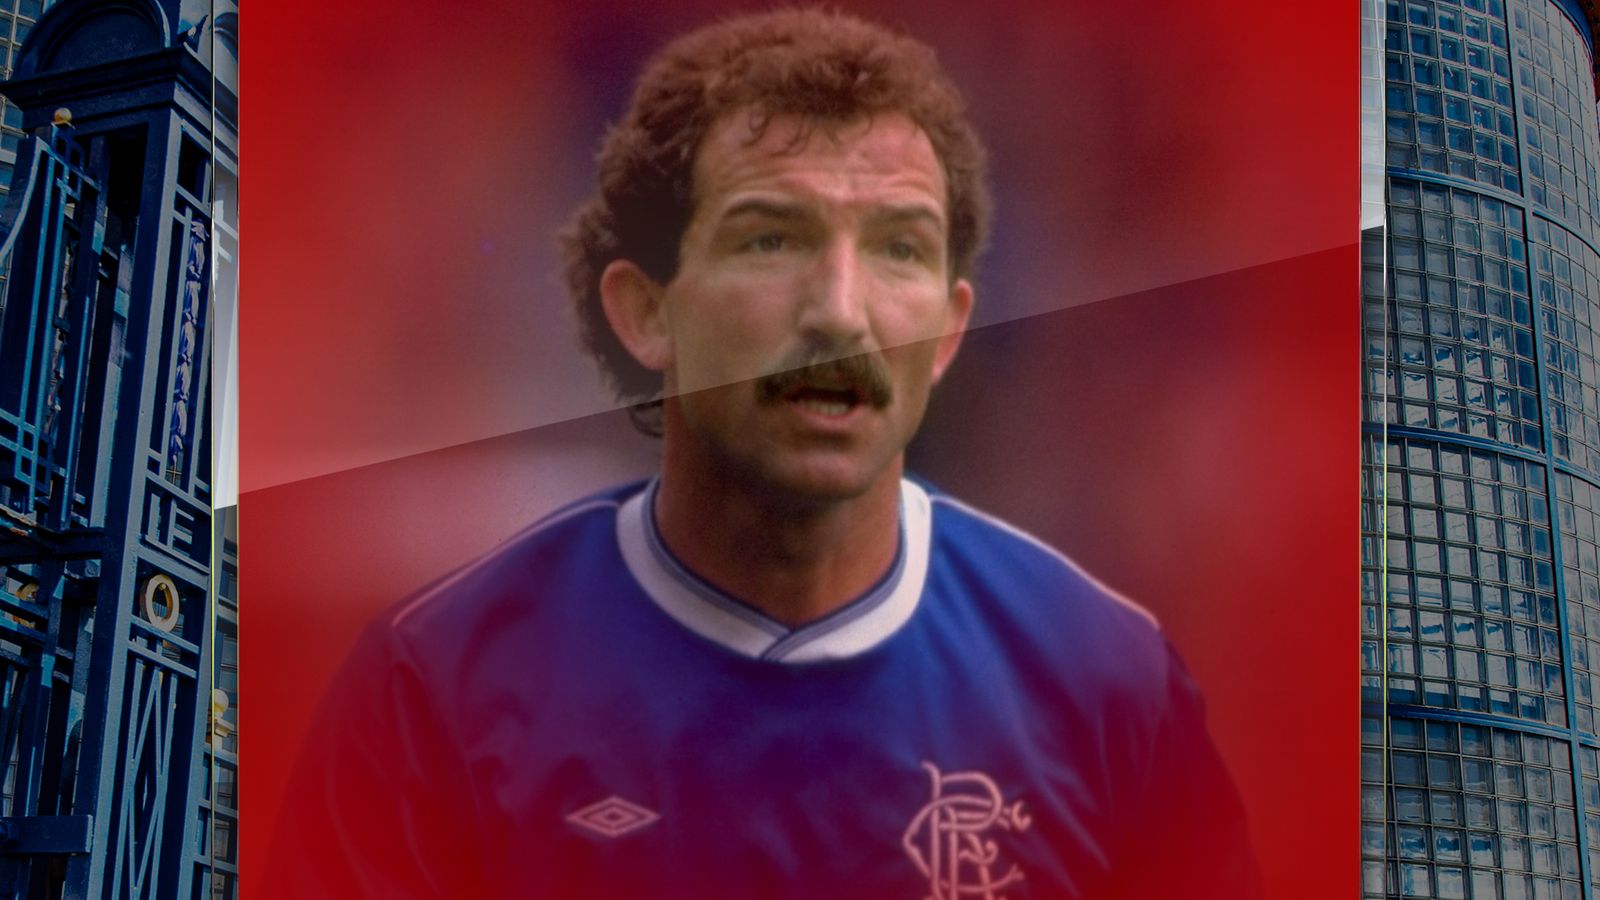 Graeme Souness at Rangers: The story of his time at Ibrox | Football